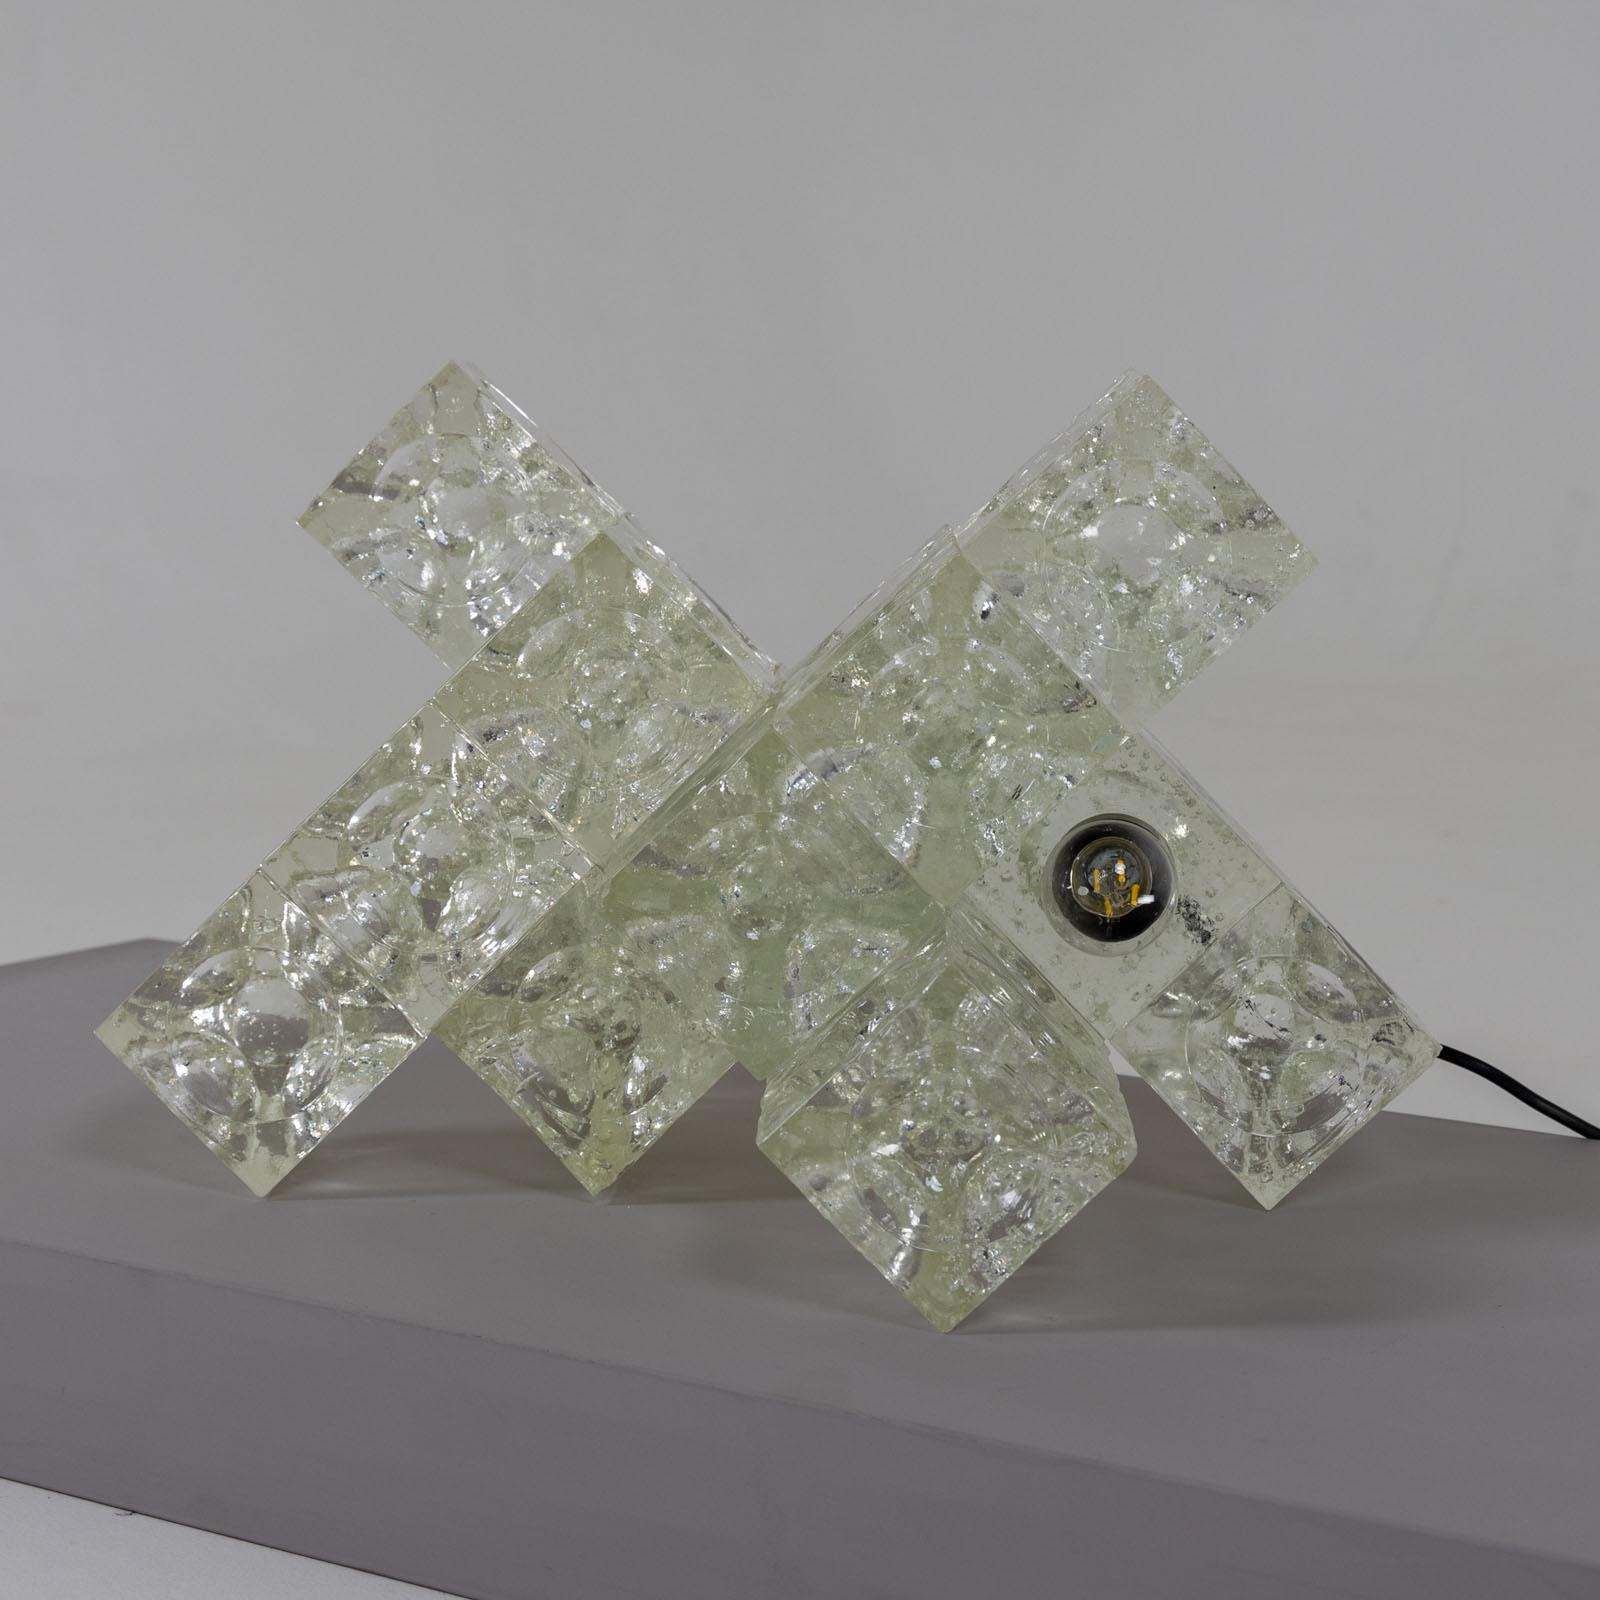 Table lamp crafted from individual cubes of clear glass joined together, created by Albano Poli in the 1960s. Accompanied by a certificate of authenticity, this lamp carries the distinctive touch of Albano Poli's creative vision, making it a